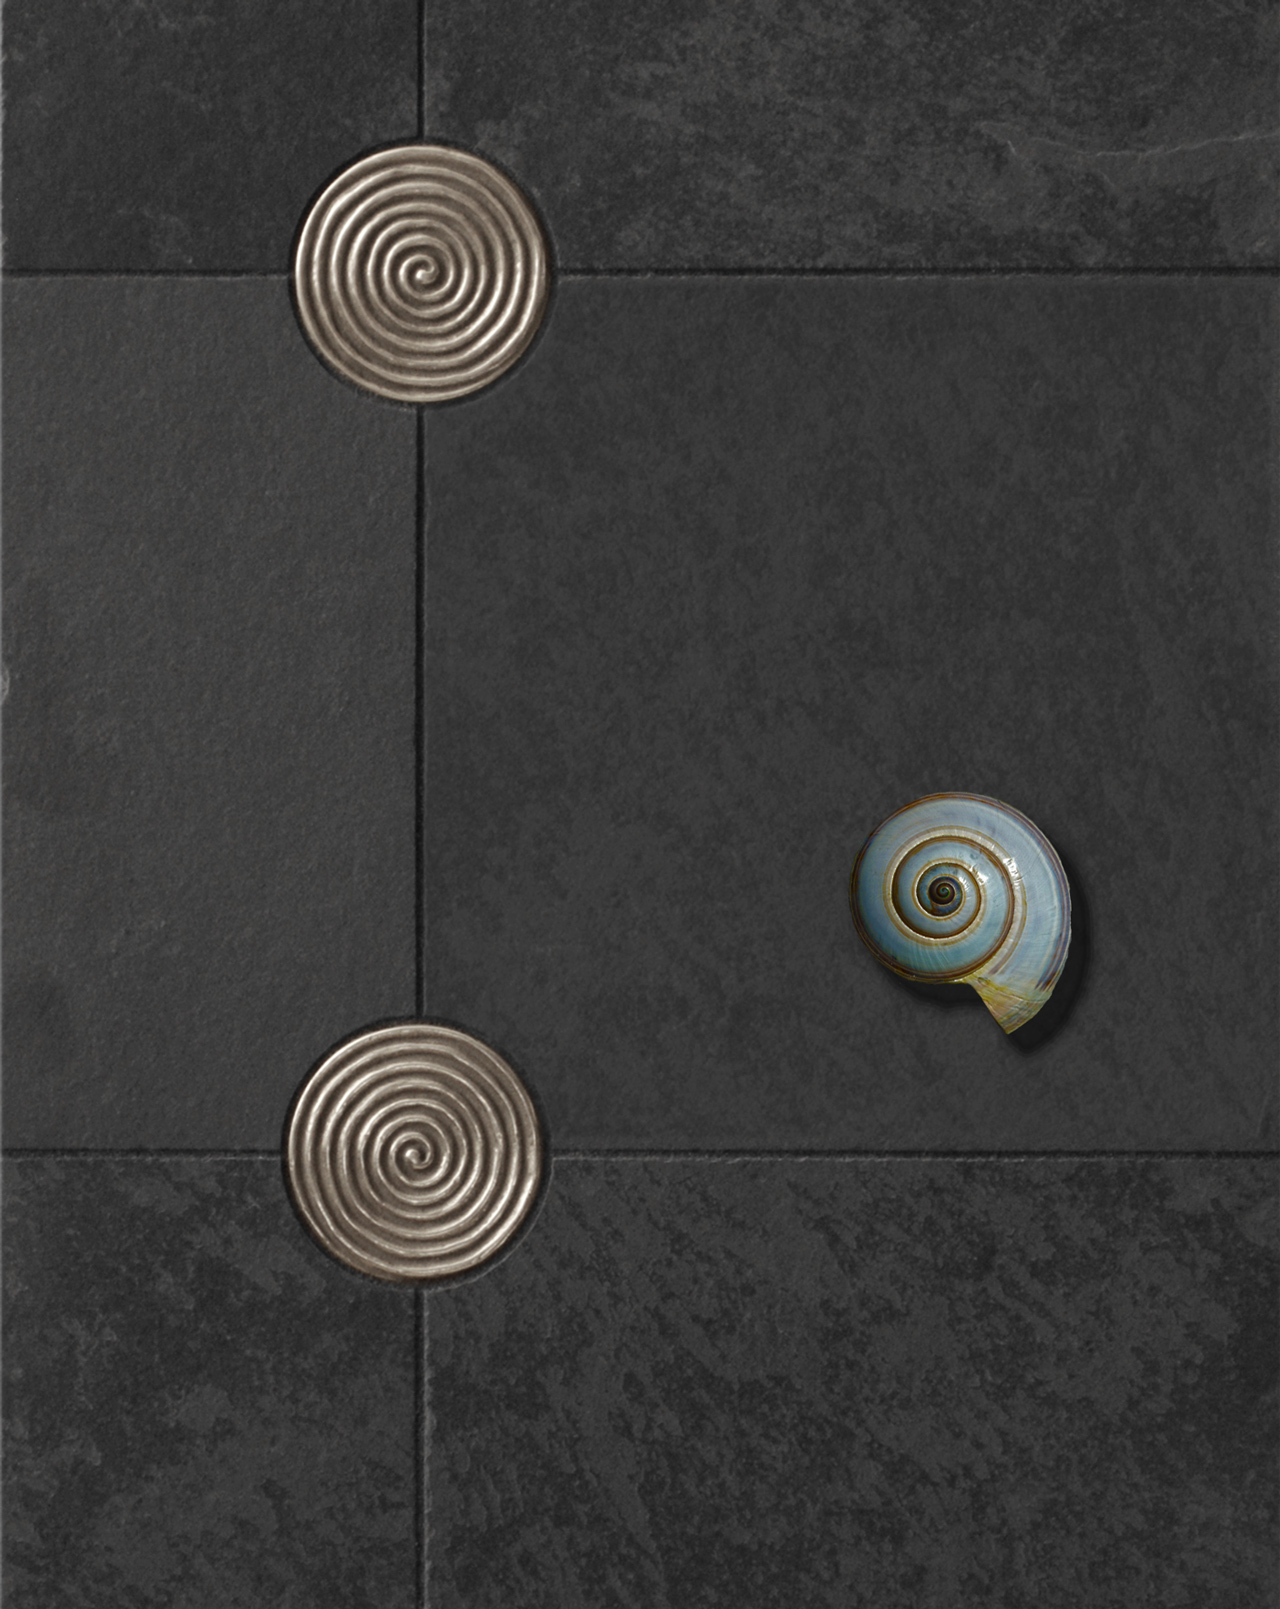 Bronzework Studio Classic Petroglyph 2.5-inch metal accent inset tile with black stone